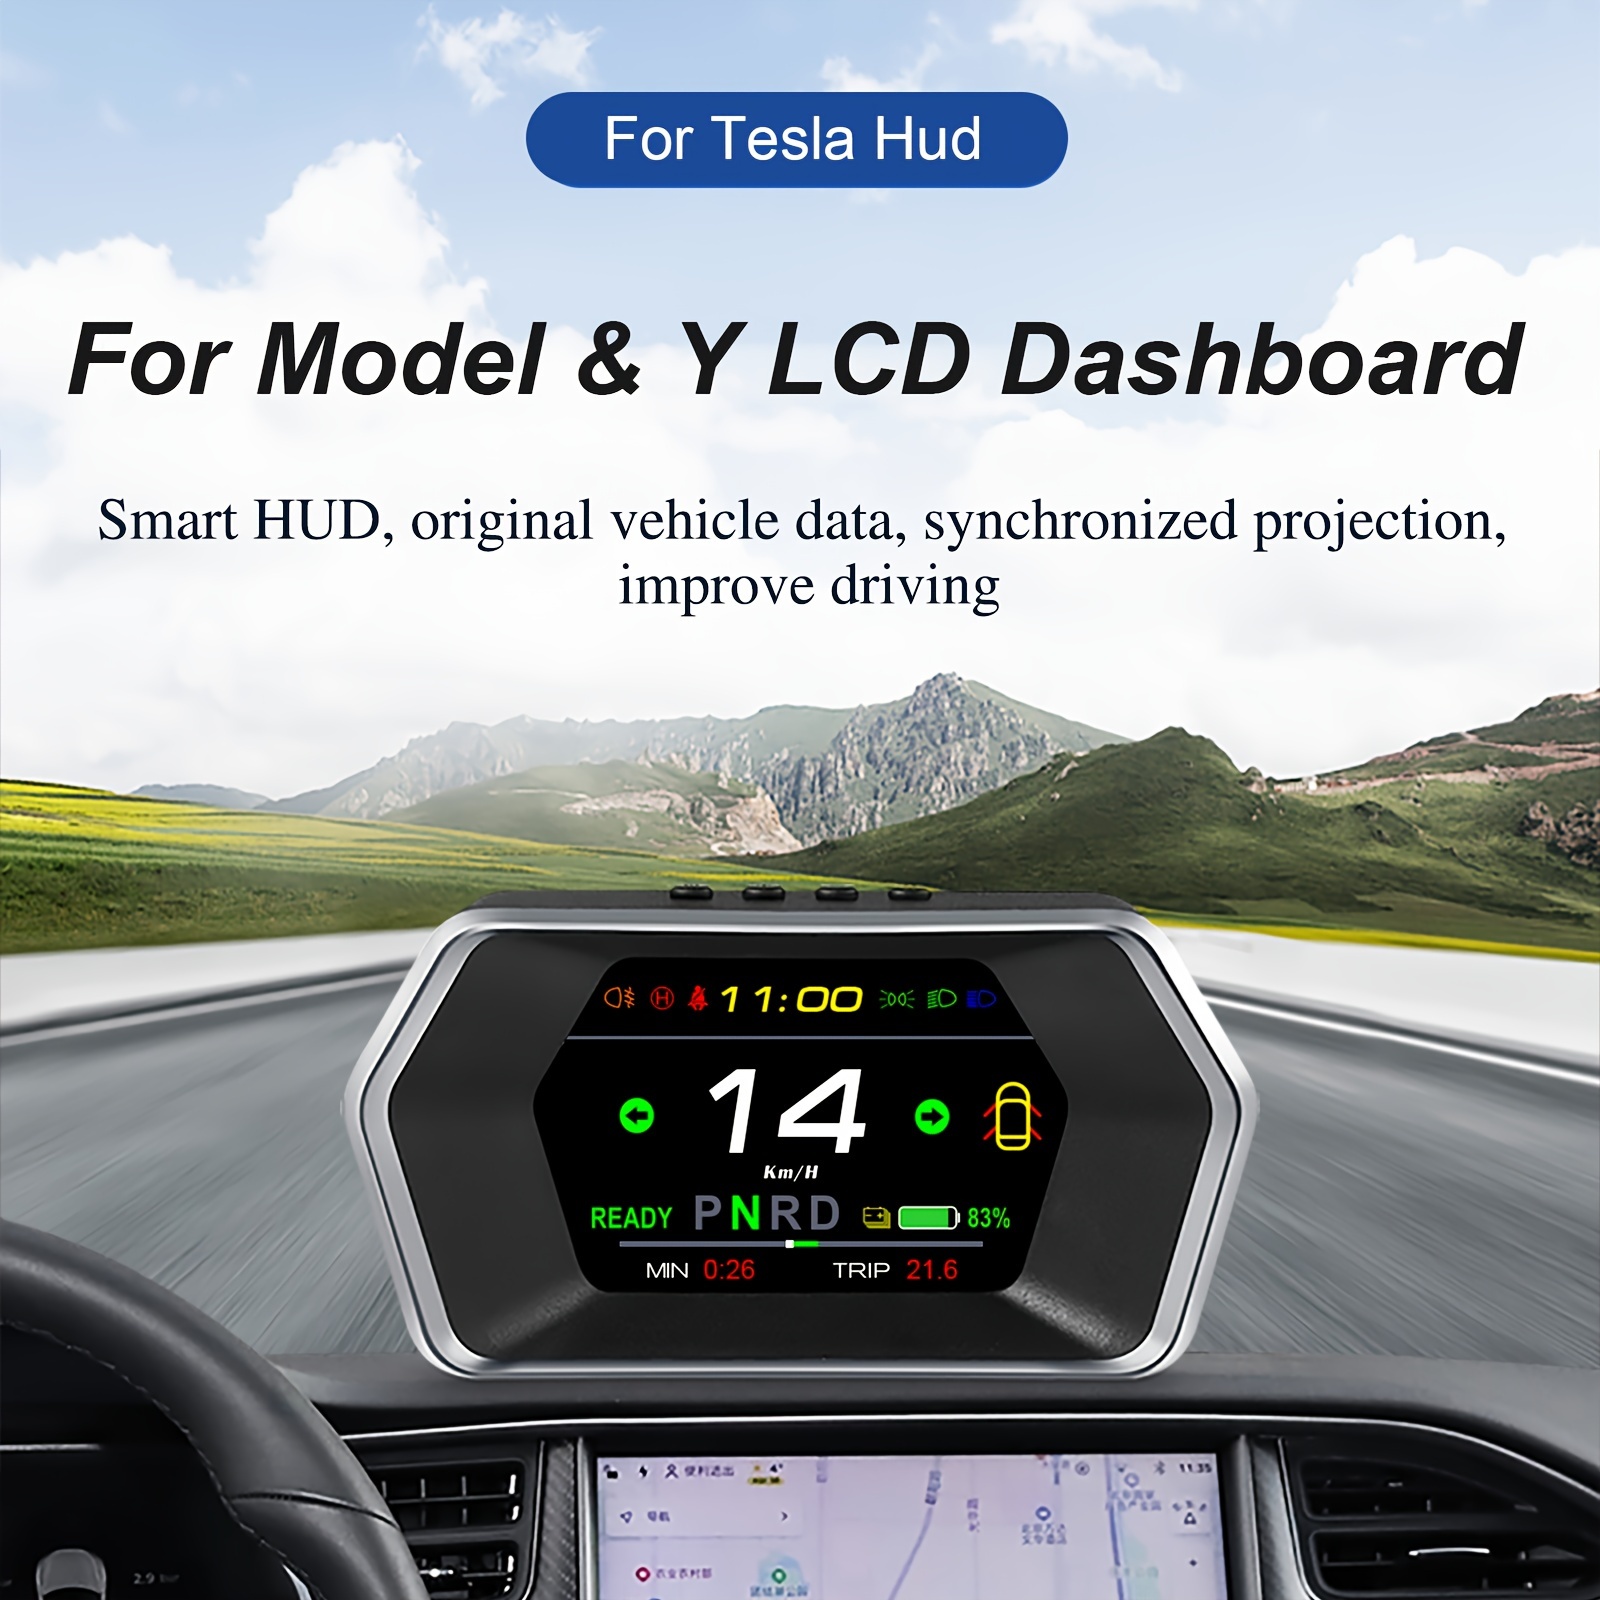 9 Auto Car Dashboard Touch Screen Driver Meter Monitor For Tesla Model 3/Y